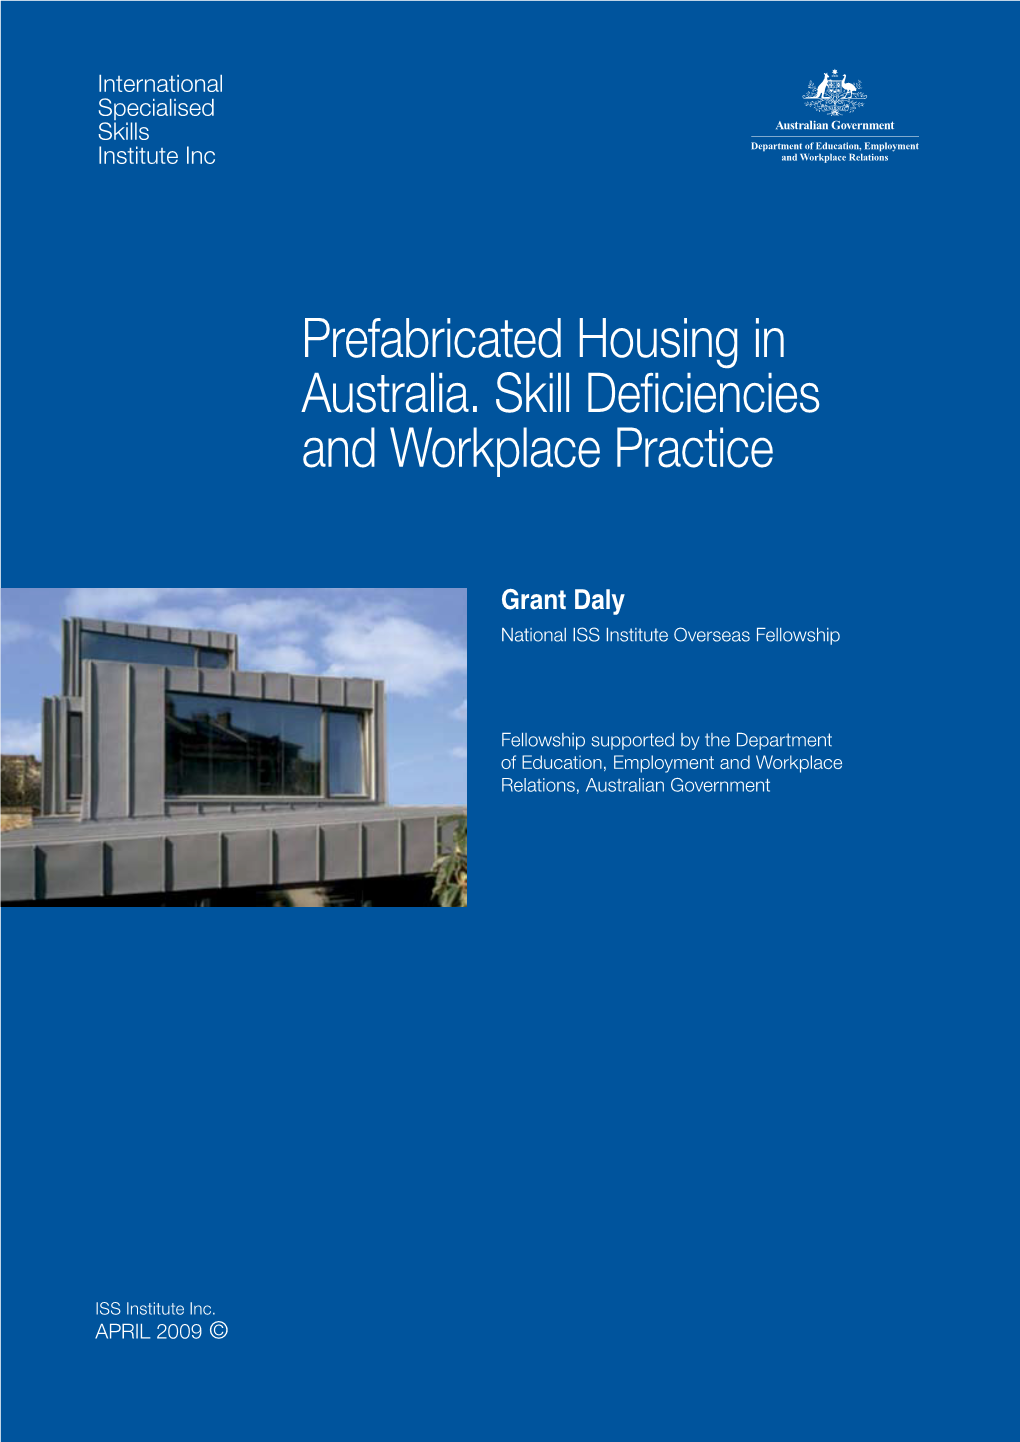 Prefabricated Housing in Australia. Skill Deficiencies and Workplace Practice